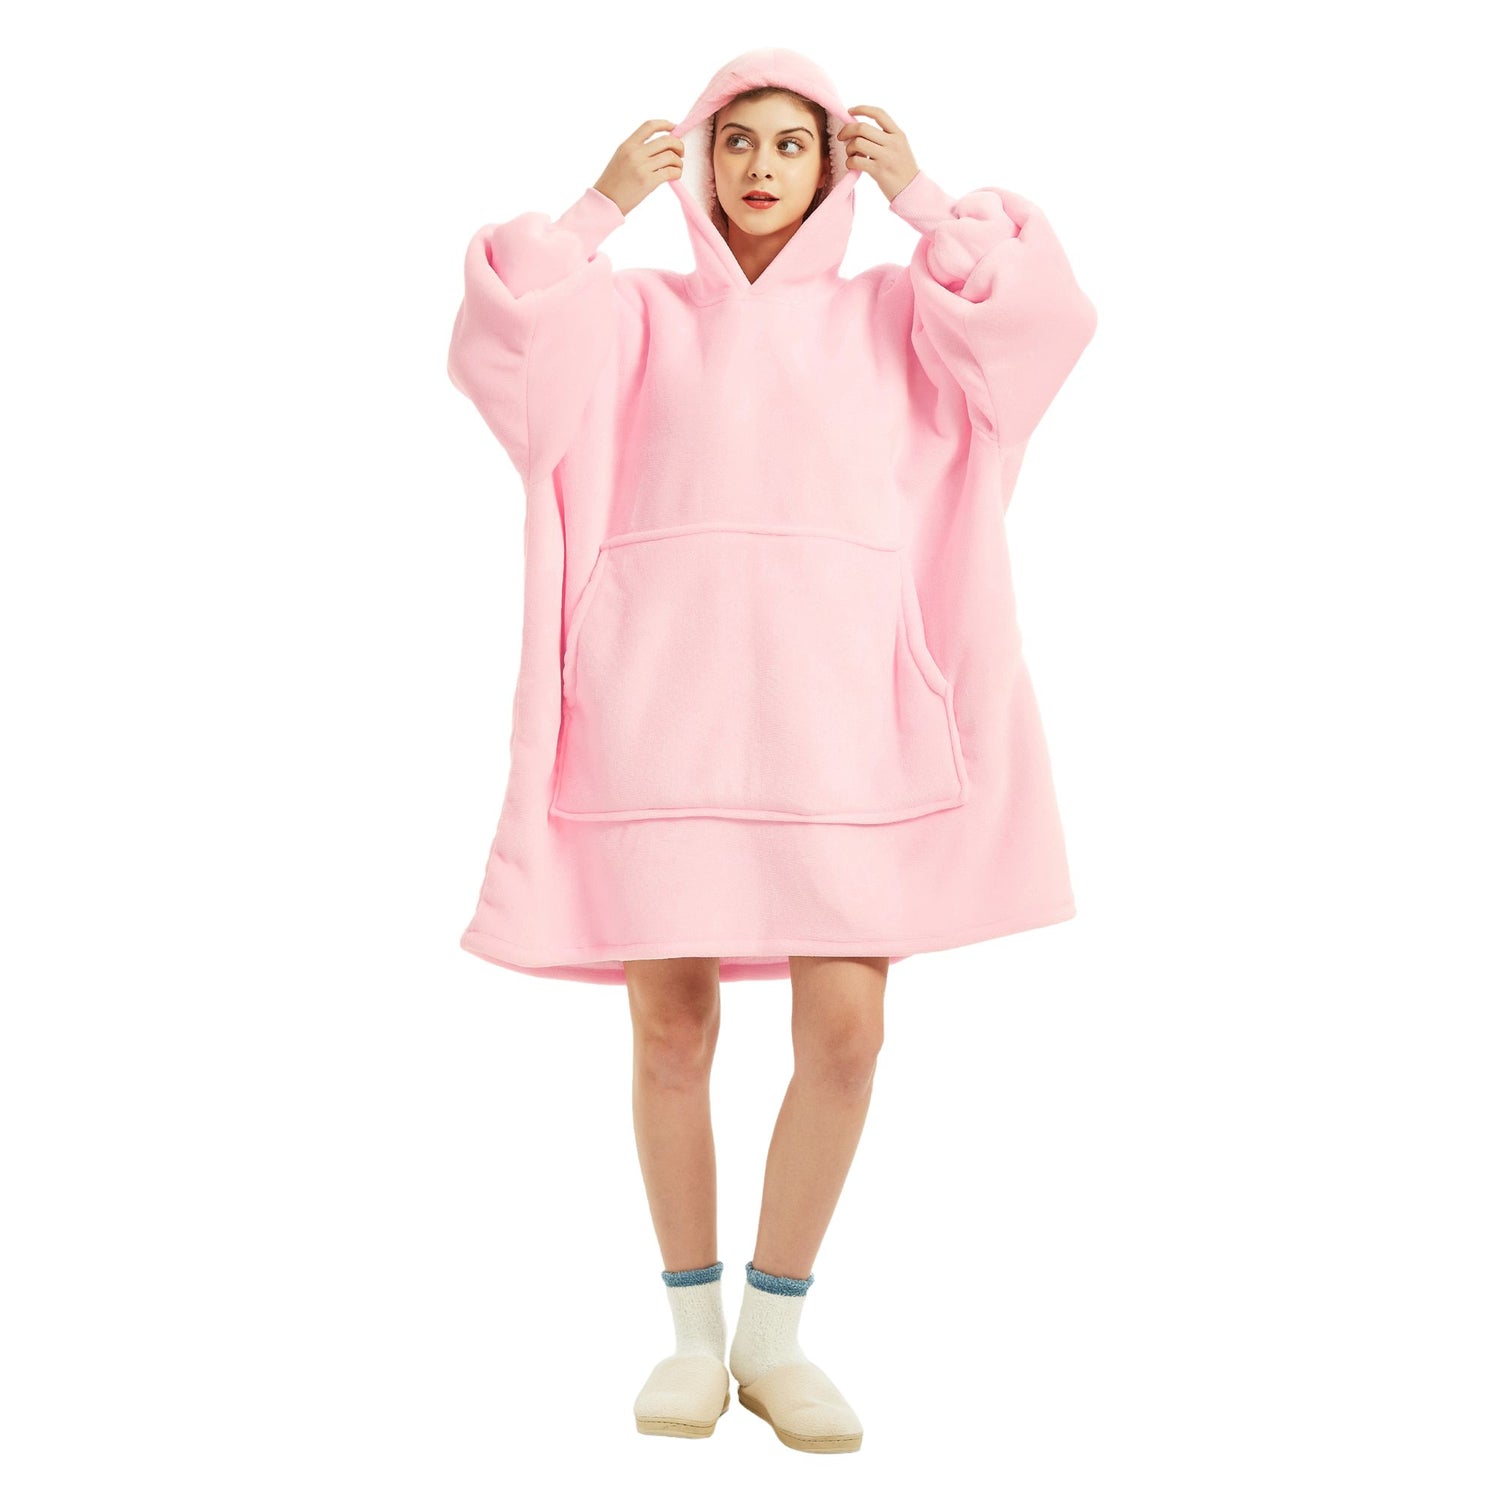 The Oversized Hoodie® femme cocon douceur confort moelleux rose 